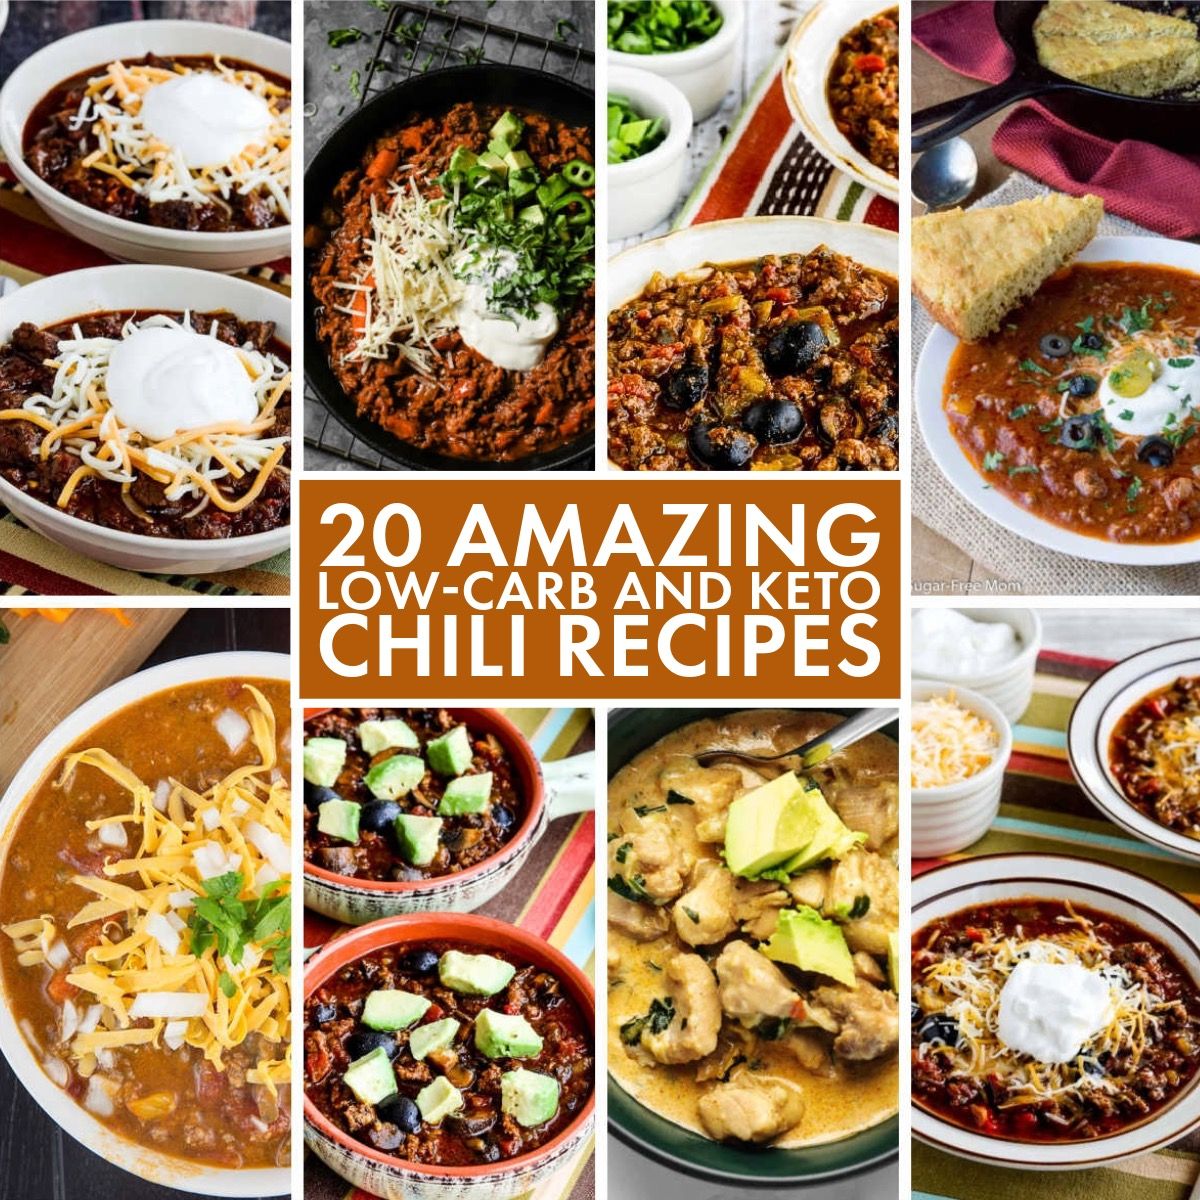 20 Great Low Carb and Keto Chili Recipes. Text overlay collage to display featured recipes.